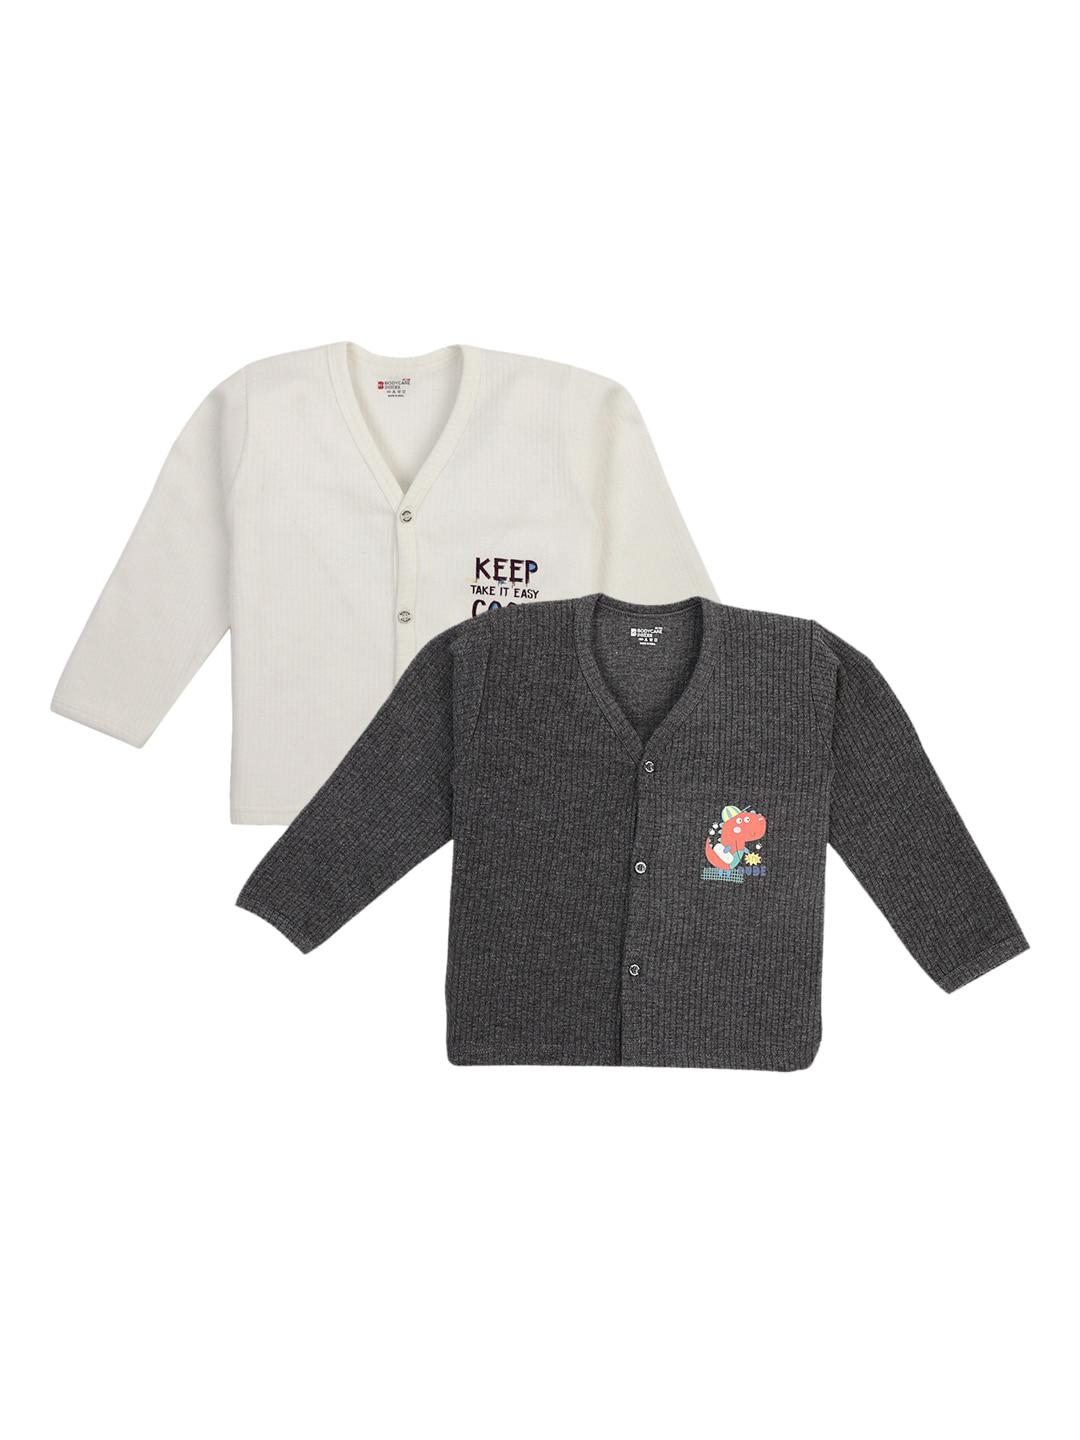 Bodycare Kids Kids Pack Of 2 Cotton Thermal Top